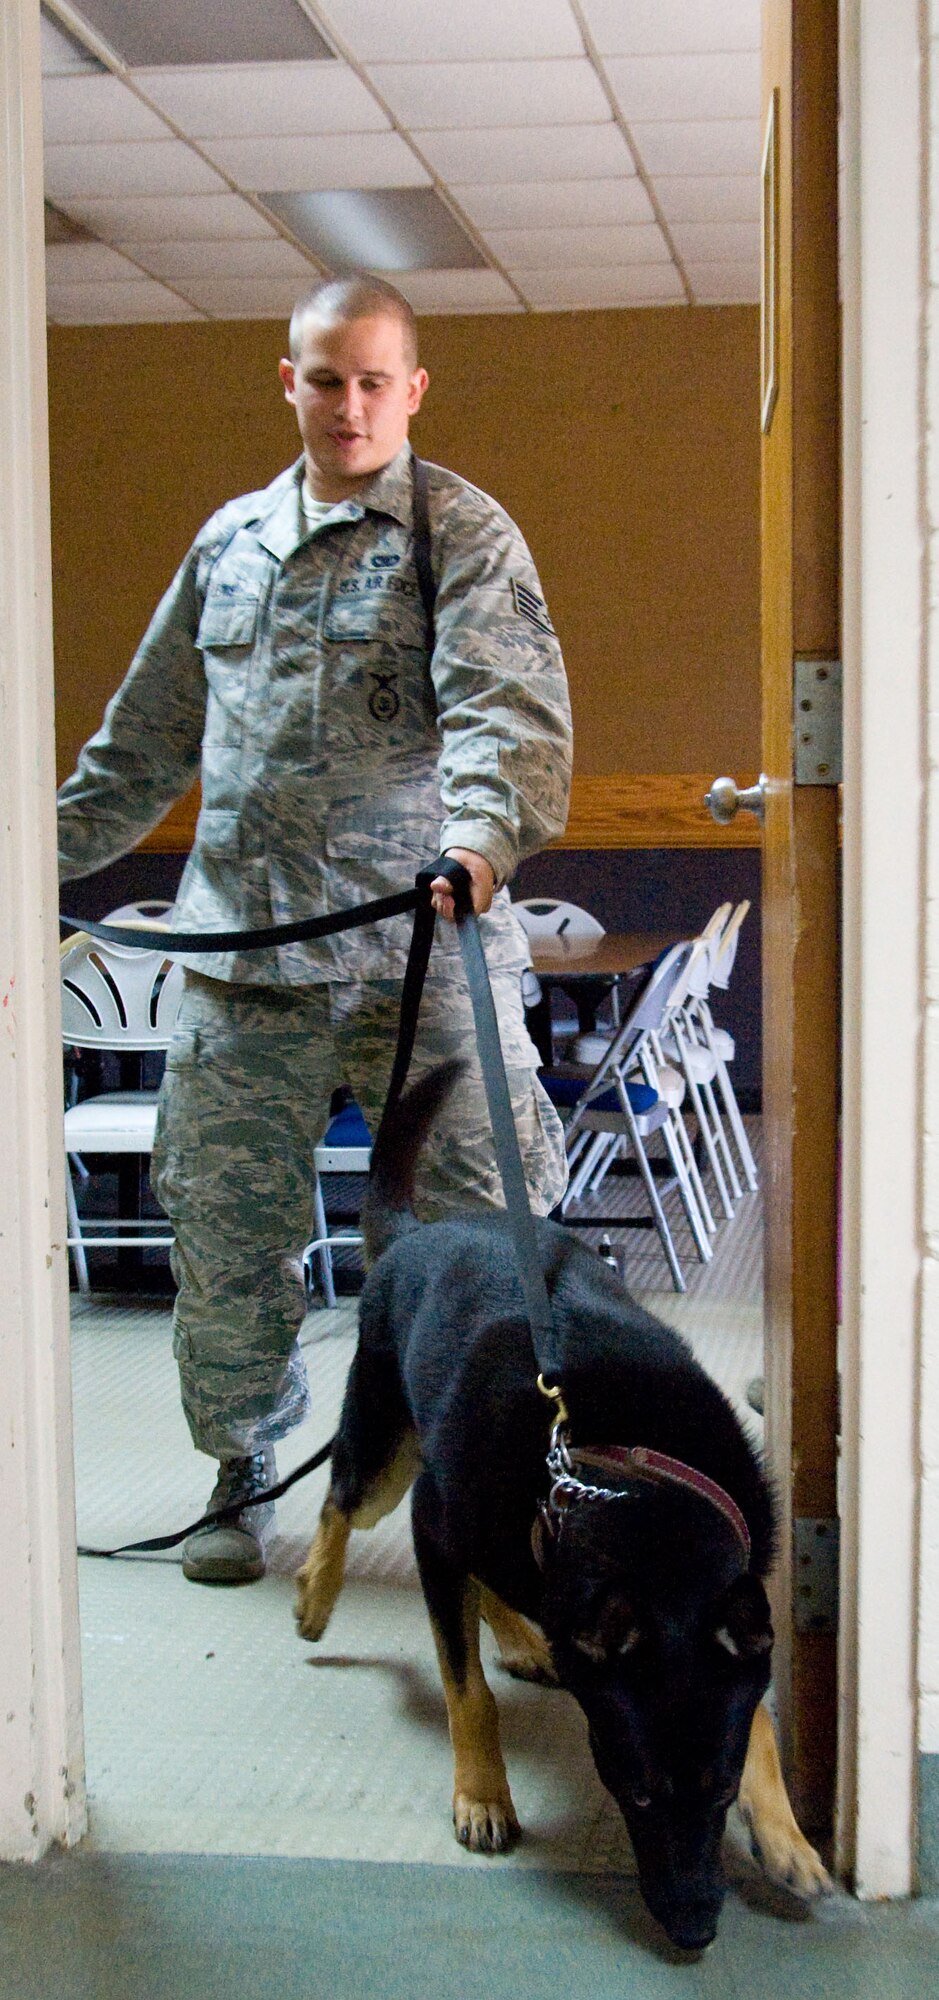 Staff Sgt. Nicholas Lewis, military working dog handler with the 436th Security Forces Squadron, searches for simulated explosive material with MWD Body. Military working dogs undergo extensive training to stay current in their fields. (U.S. Air Force photo by Adrian R. Rowan)